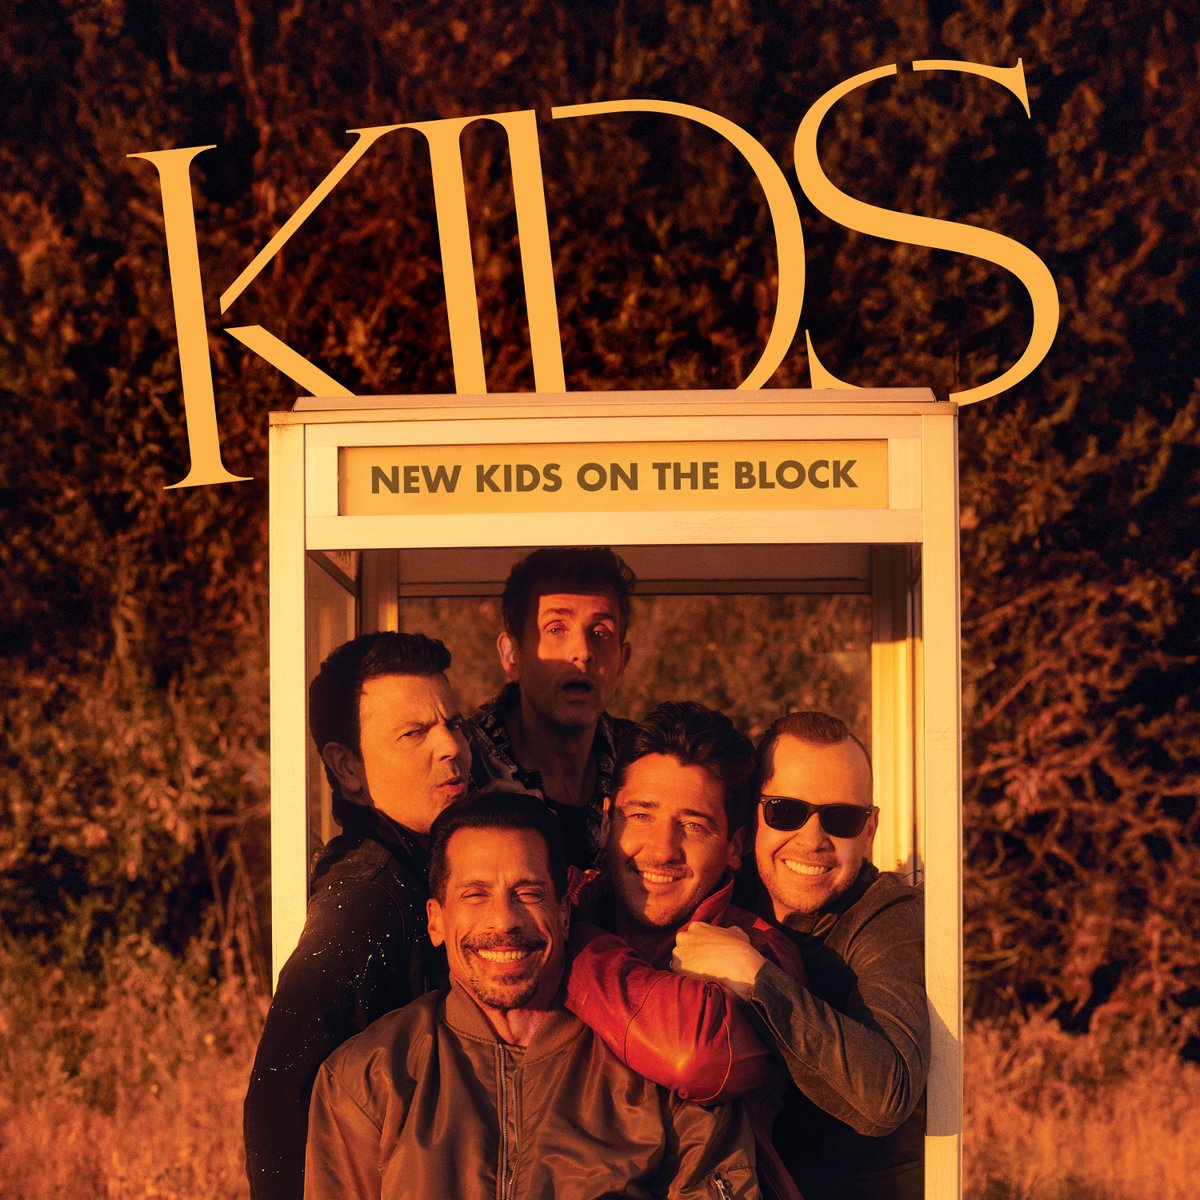 .@NKOTB's music video for their new single ‘KIDS’ is out now on @YouTube! See them live at #HersheyparkStadium on August 3. 😎 Watch the video: bit.ly/3Tp7NcC Grab tickets: bit.ly/3FHZ1ib